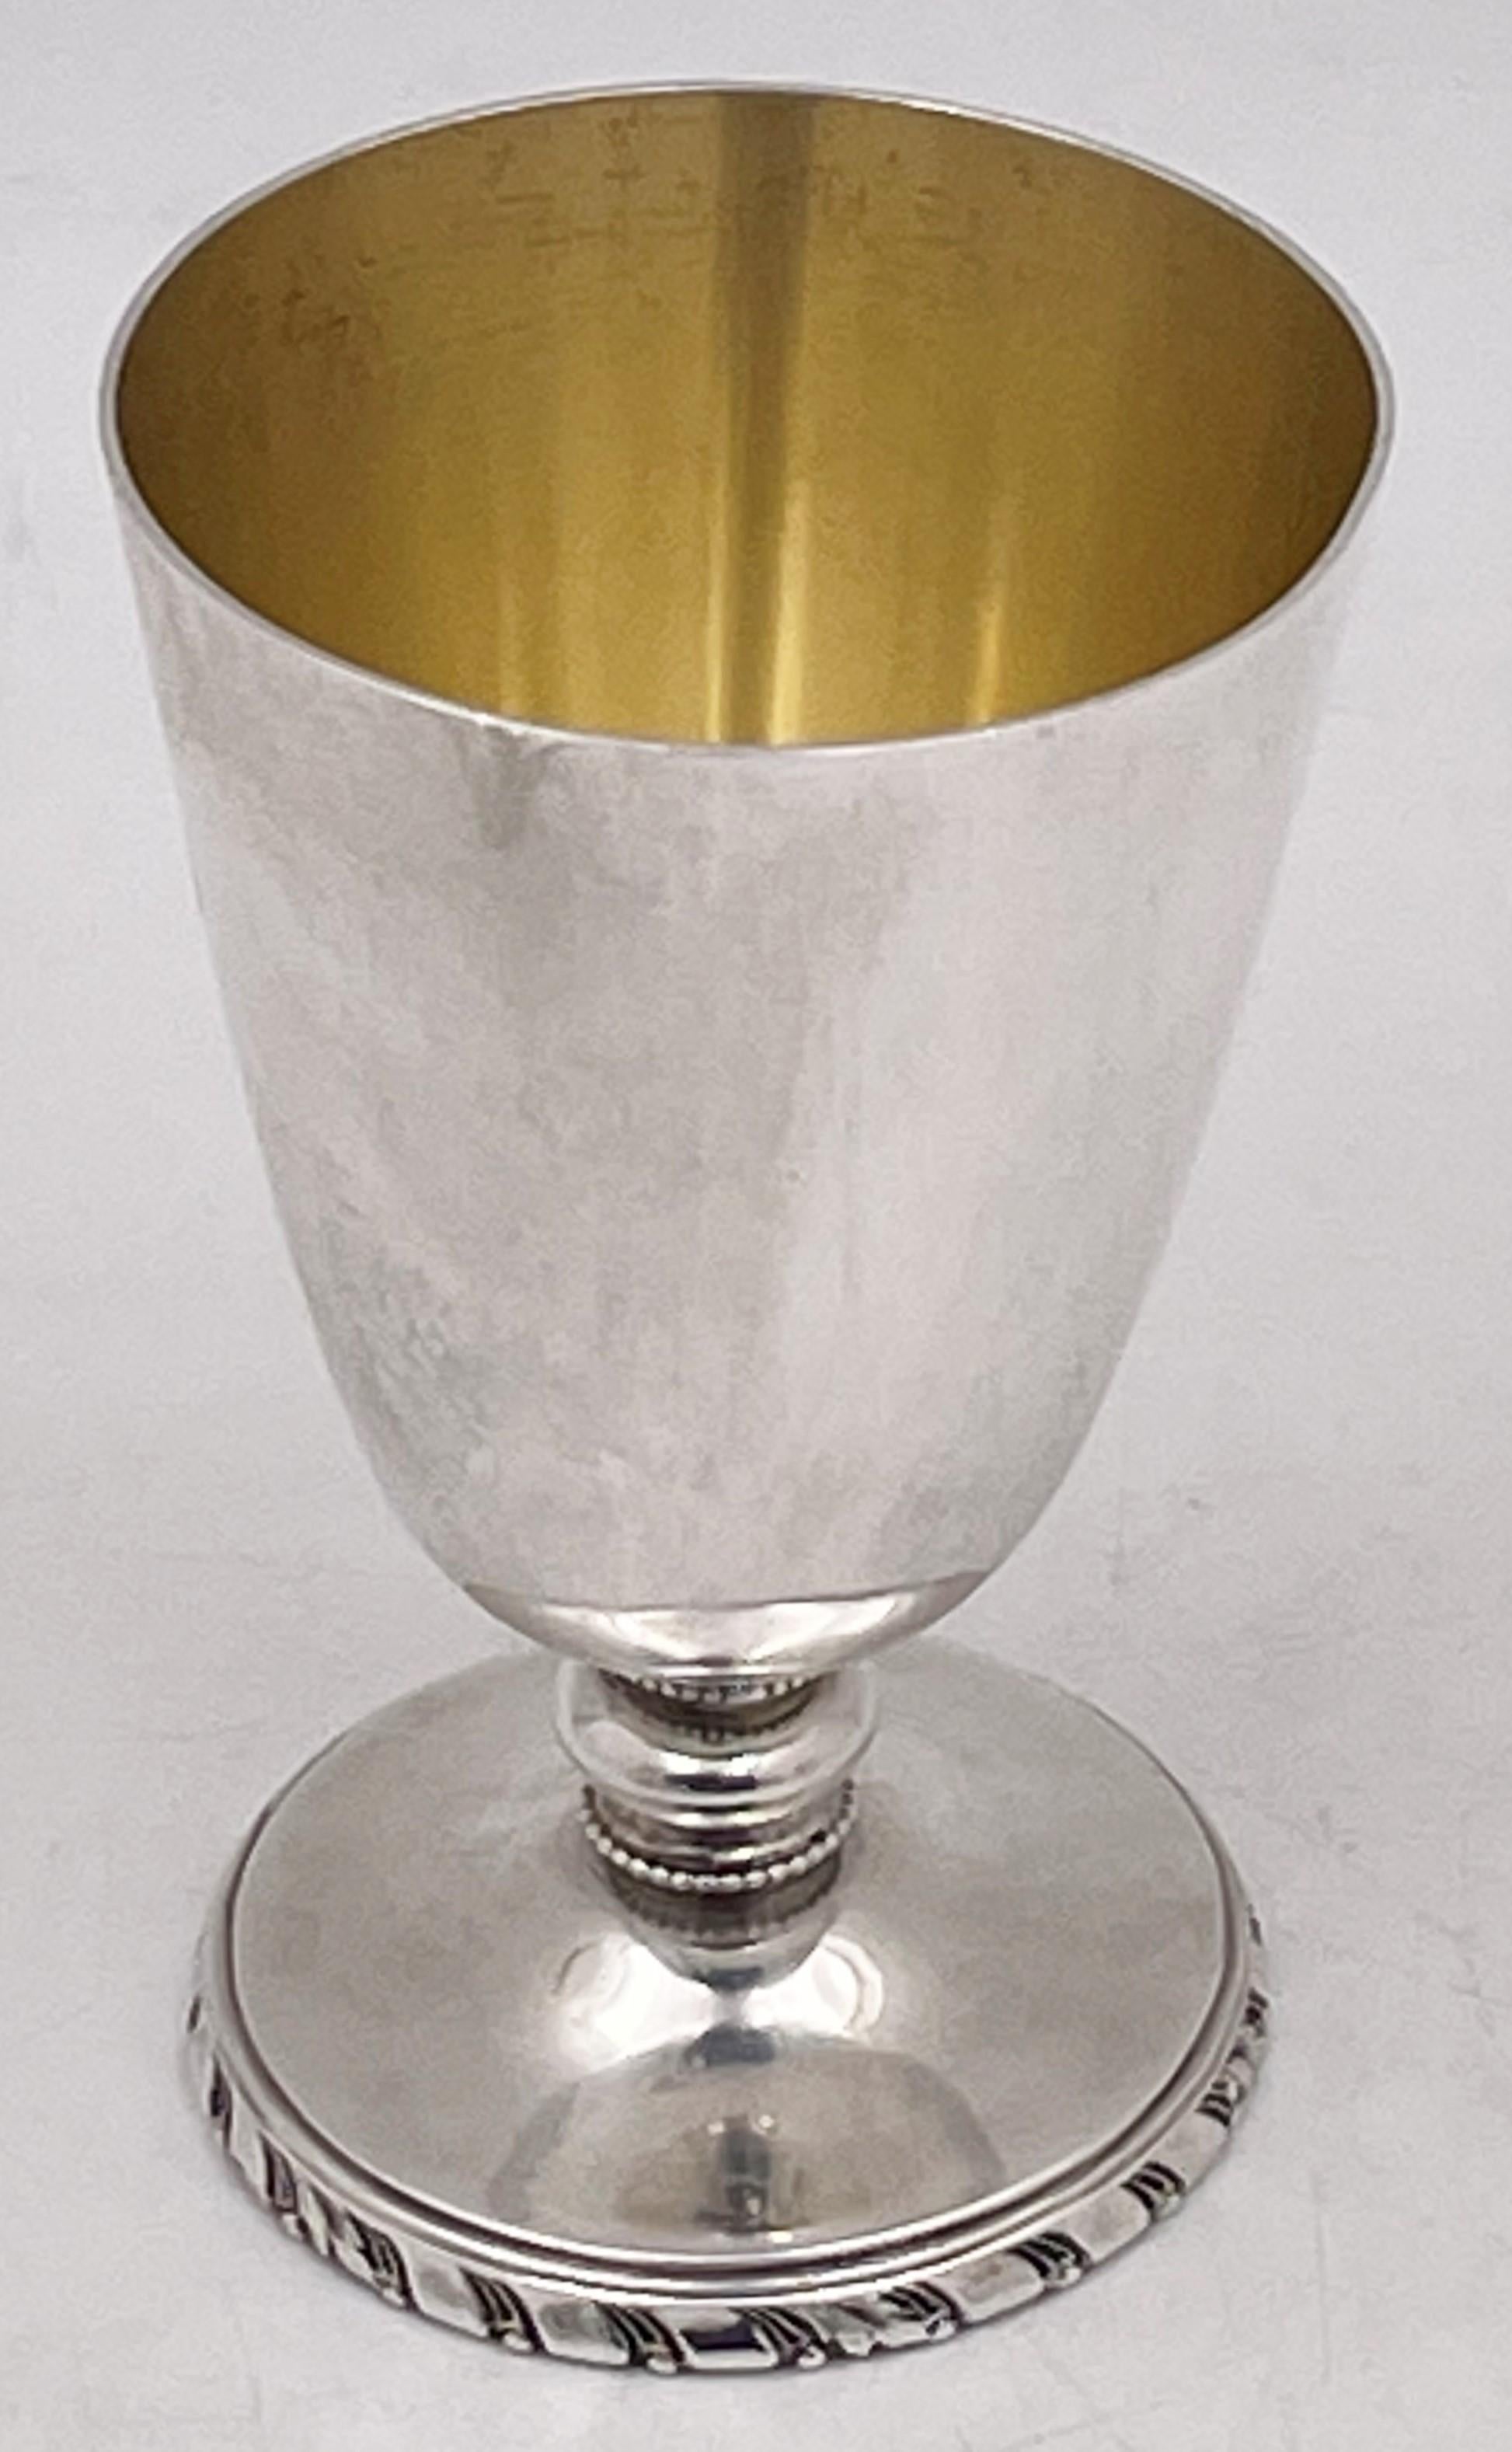 Cartier, set of 6 sterling silver Kiddush/ cordial cups in Mid-Century Modern style, with an elegant design, all of which have a faintly gilt interior. The base showcases stylized natural motifs while the stem has a beaded pattern. Each cup measures